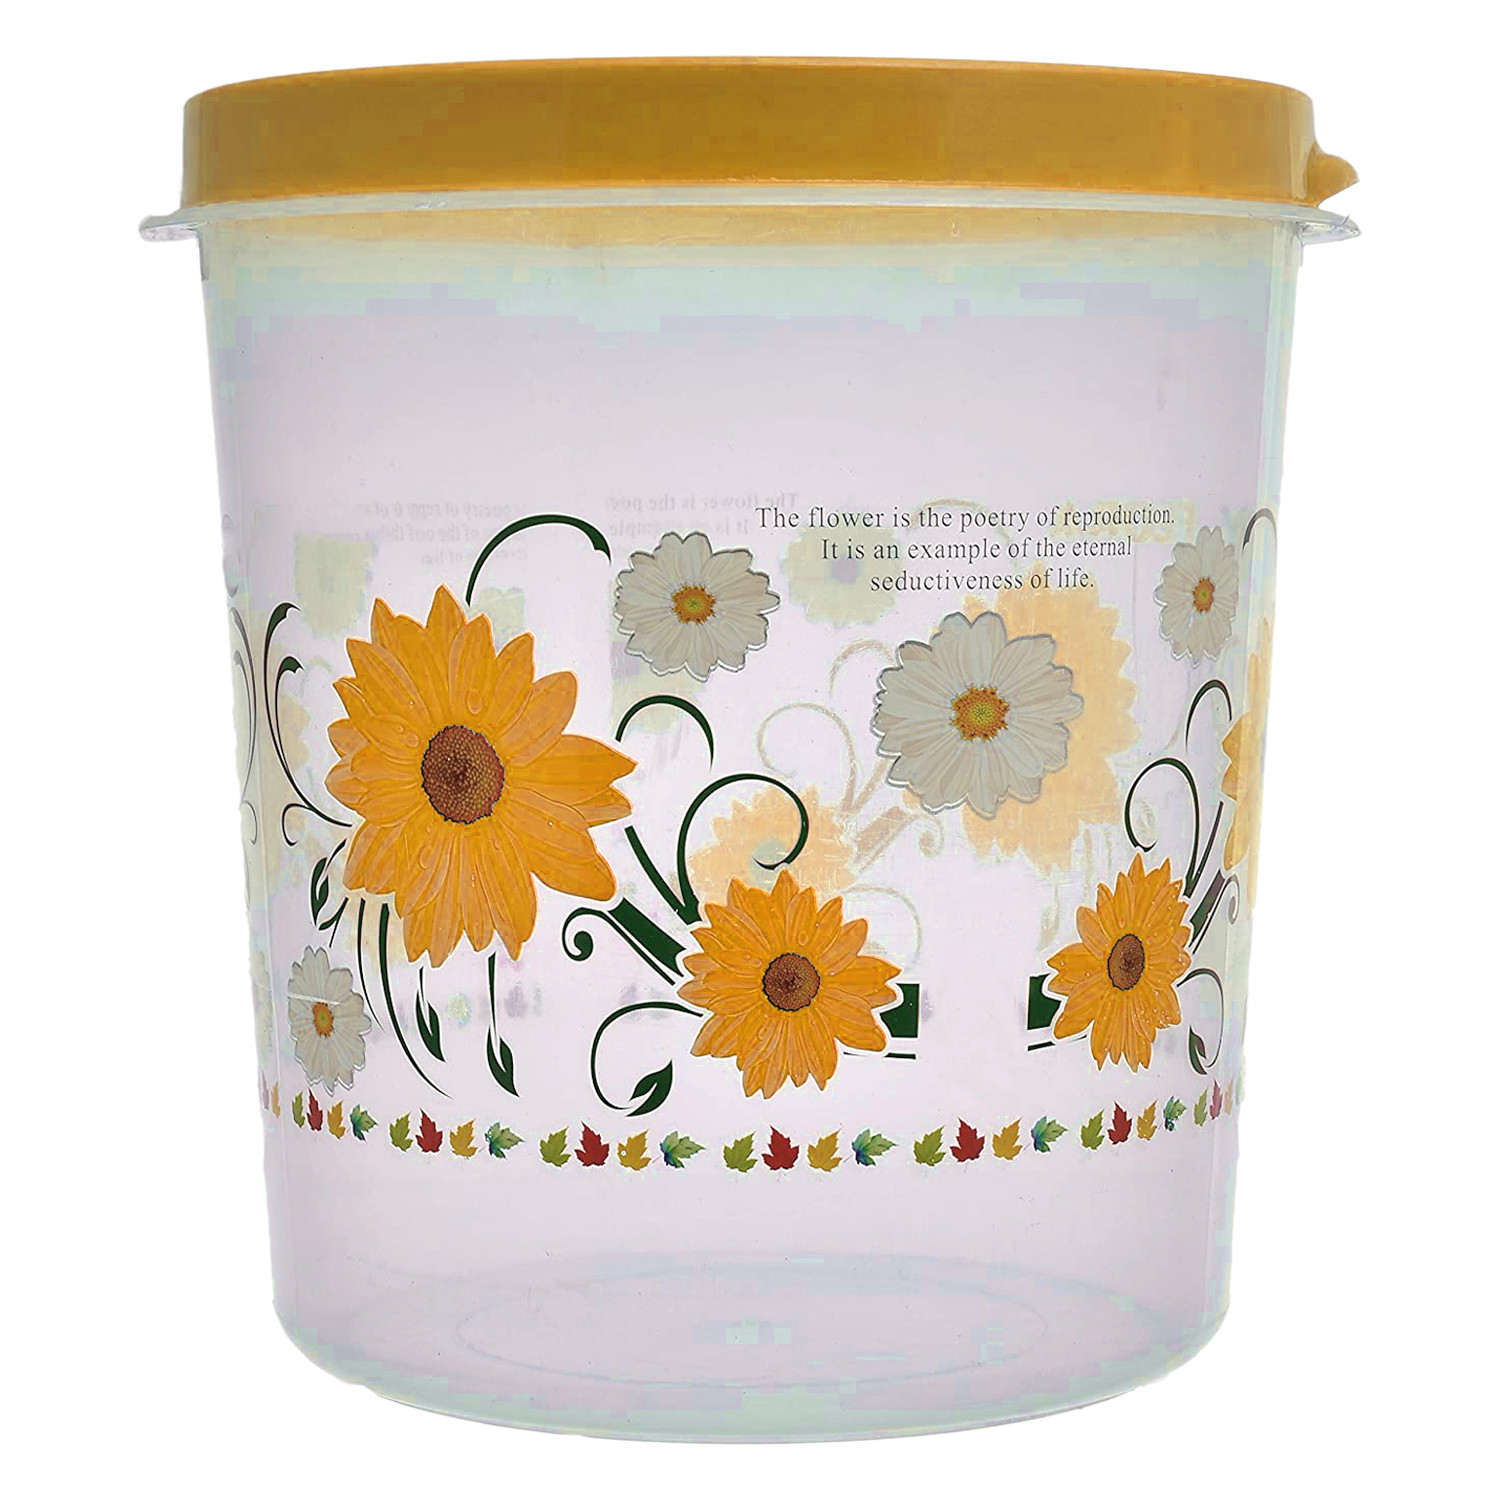 Kuber Industries Storage Container|Durable Plastic Floral Design BPA Free Food Kitchen Organizer With Lid|Food Utility Jar, 16 Ltr (Yellow)